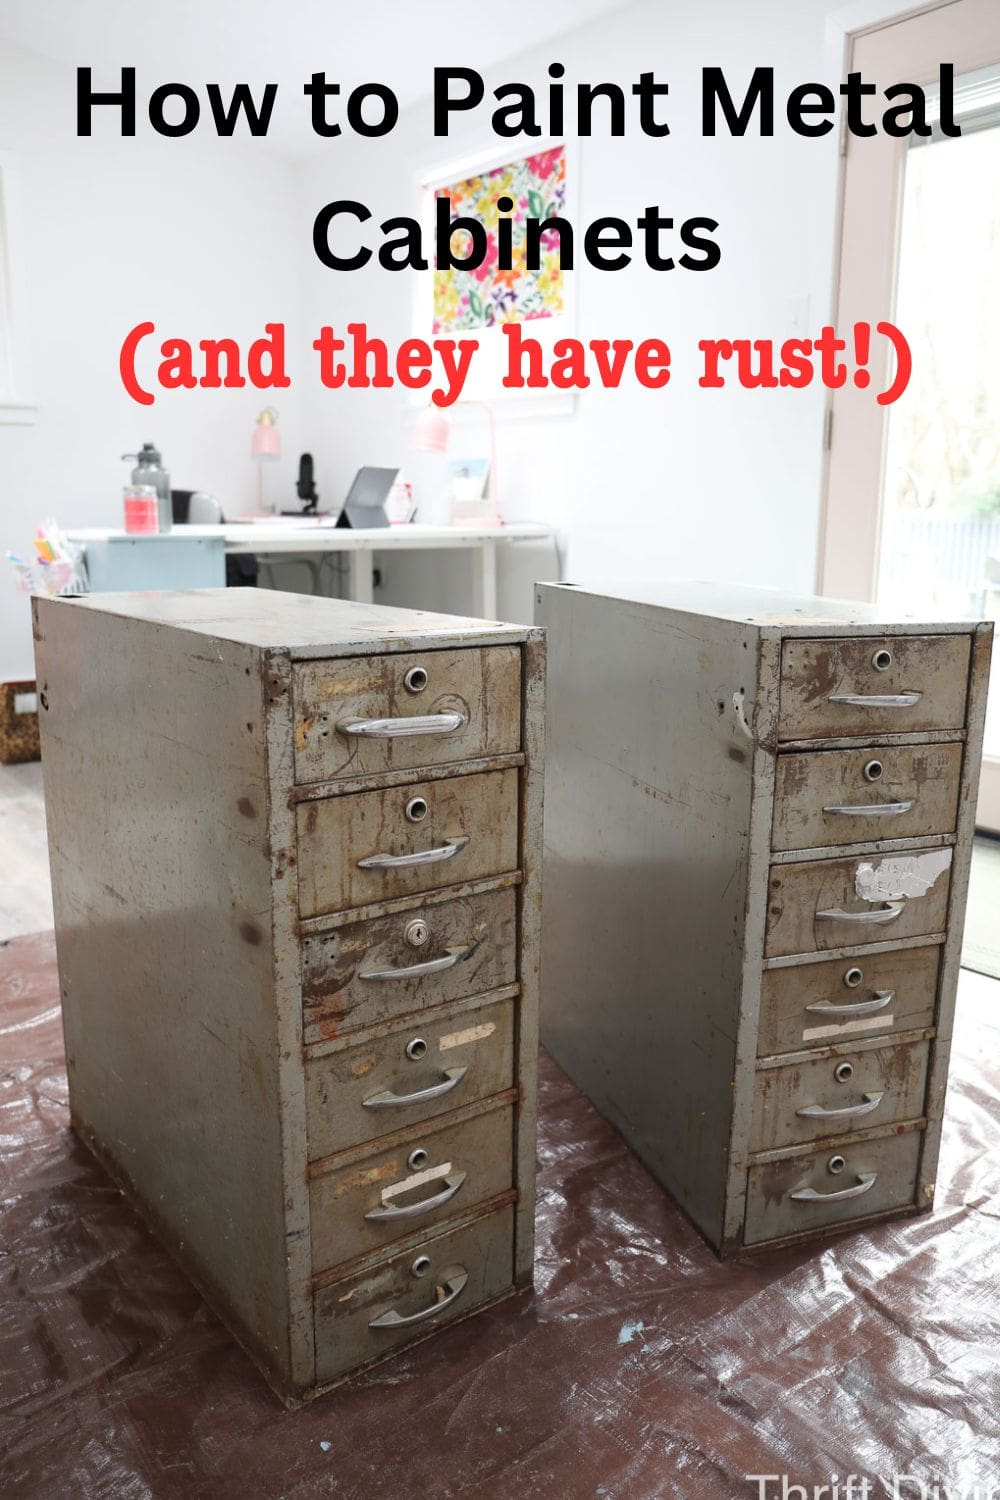 How to Paint Rusty Metal Cabinets - How to clean, prep, prime, and paint the metal. - Thrift Diving